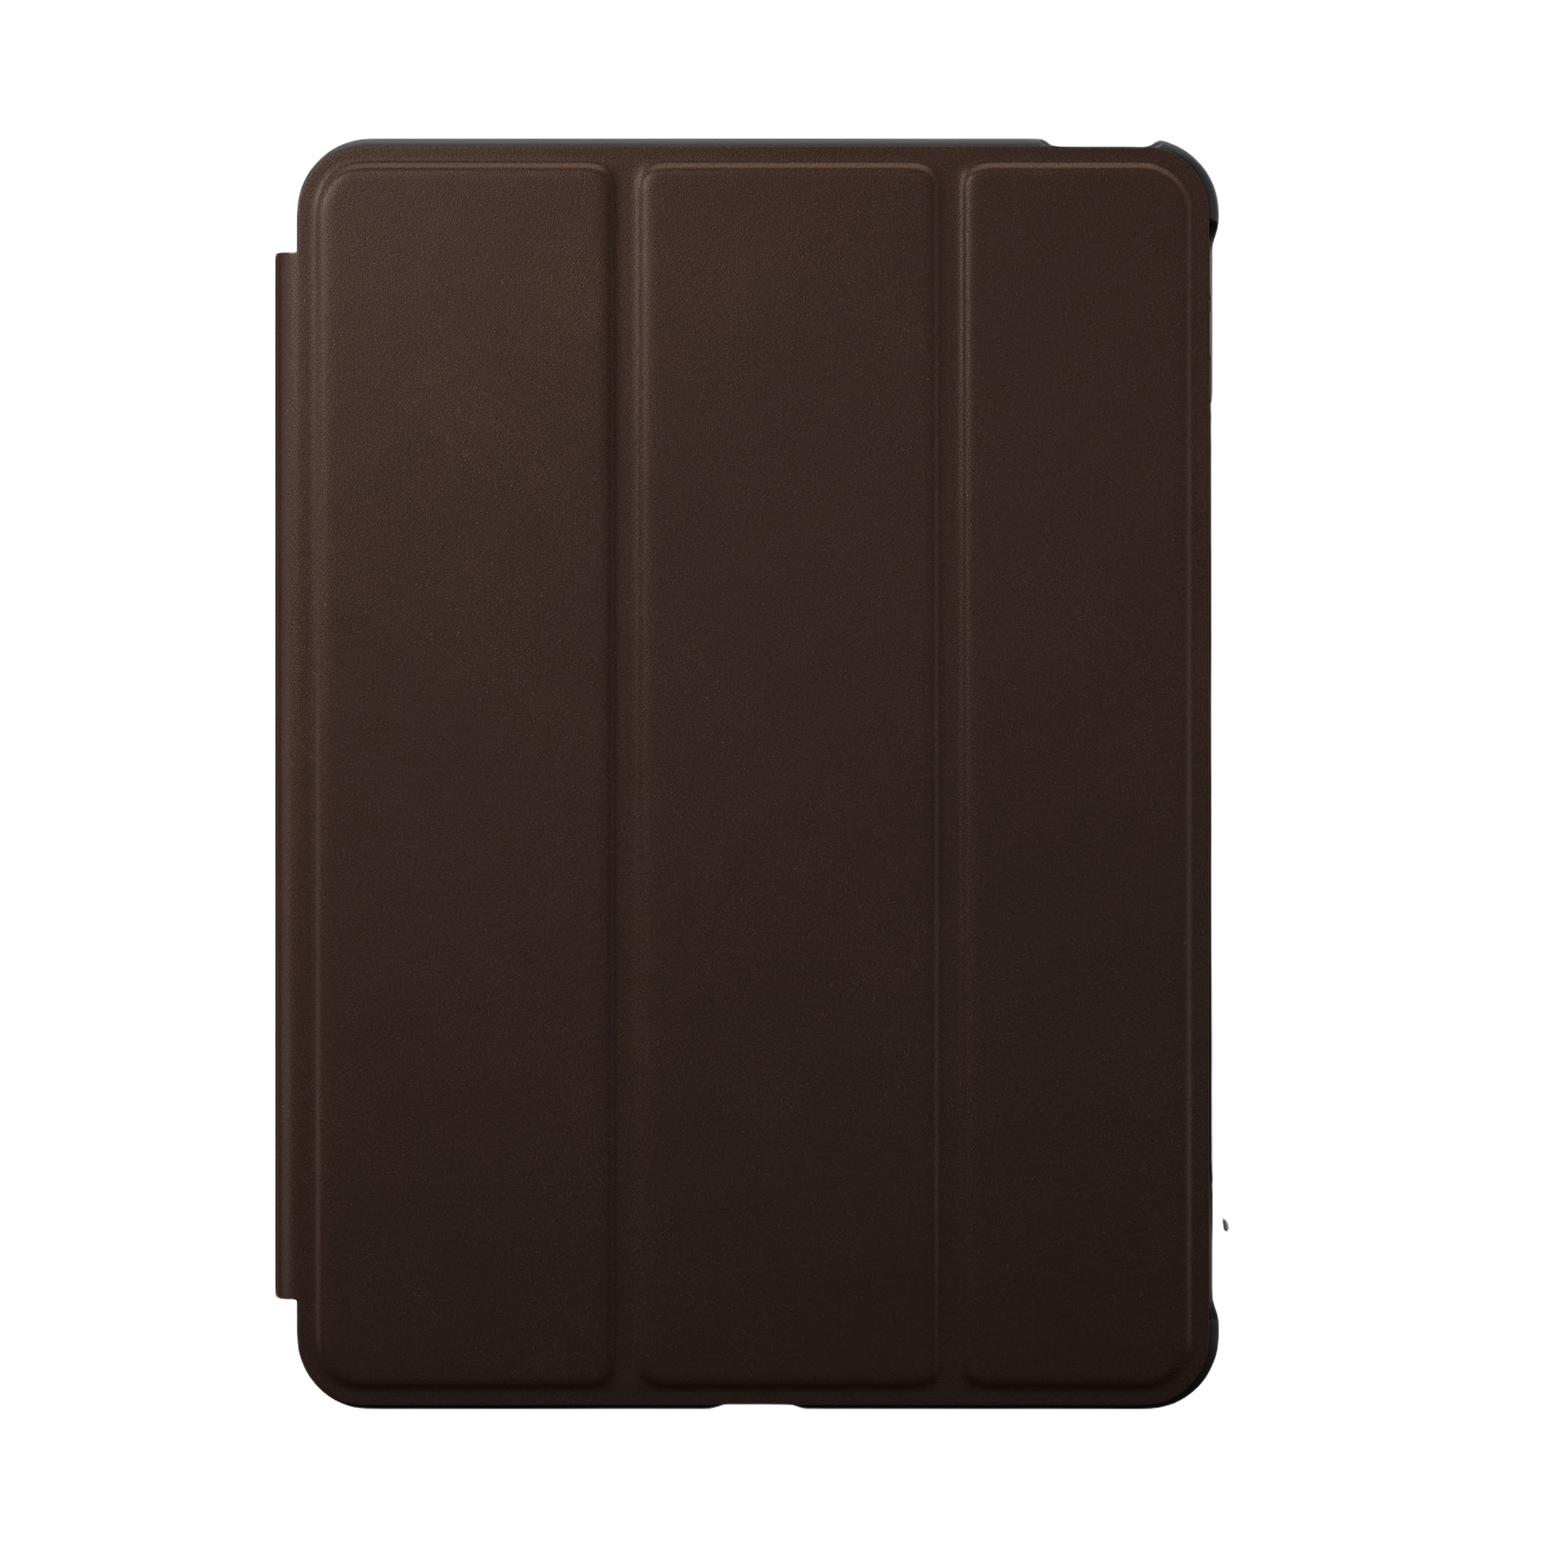 Nomad Modern Leather Folio for iPad Air (4th Gen) - Rustic Brown - Discontinued